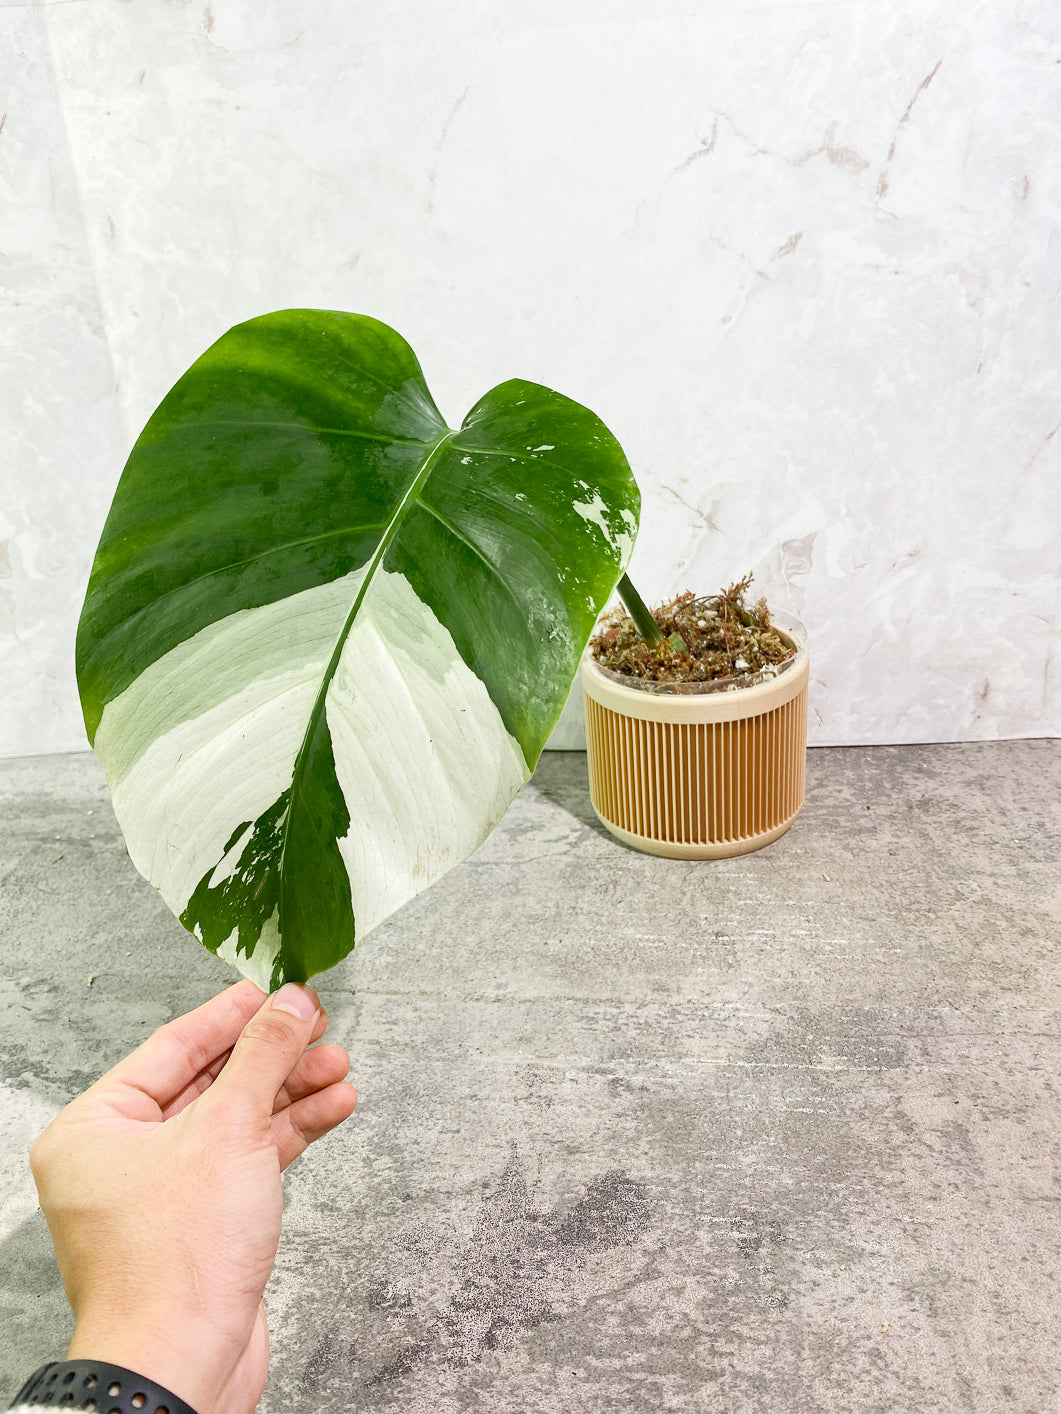 Monstera Mint 1 leaf 1 bud slightly rooted in moss